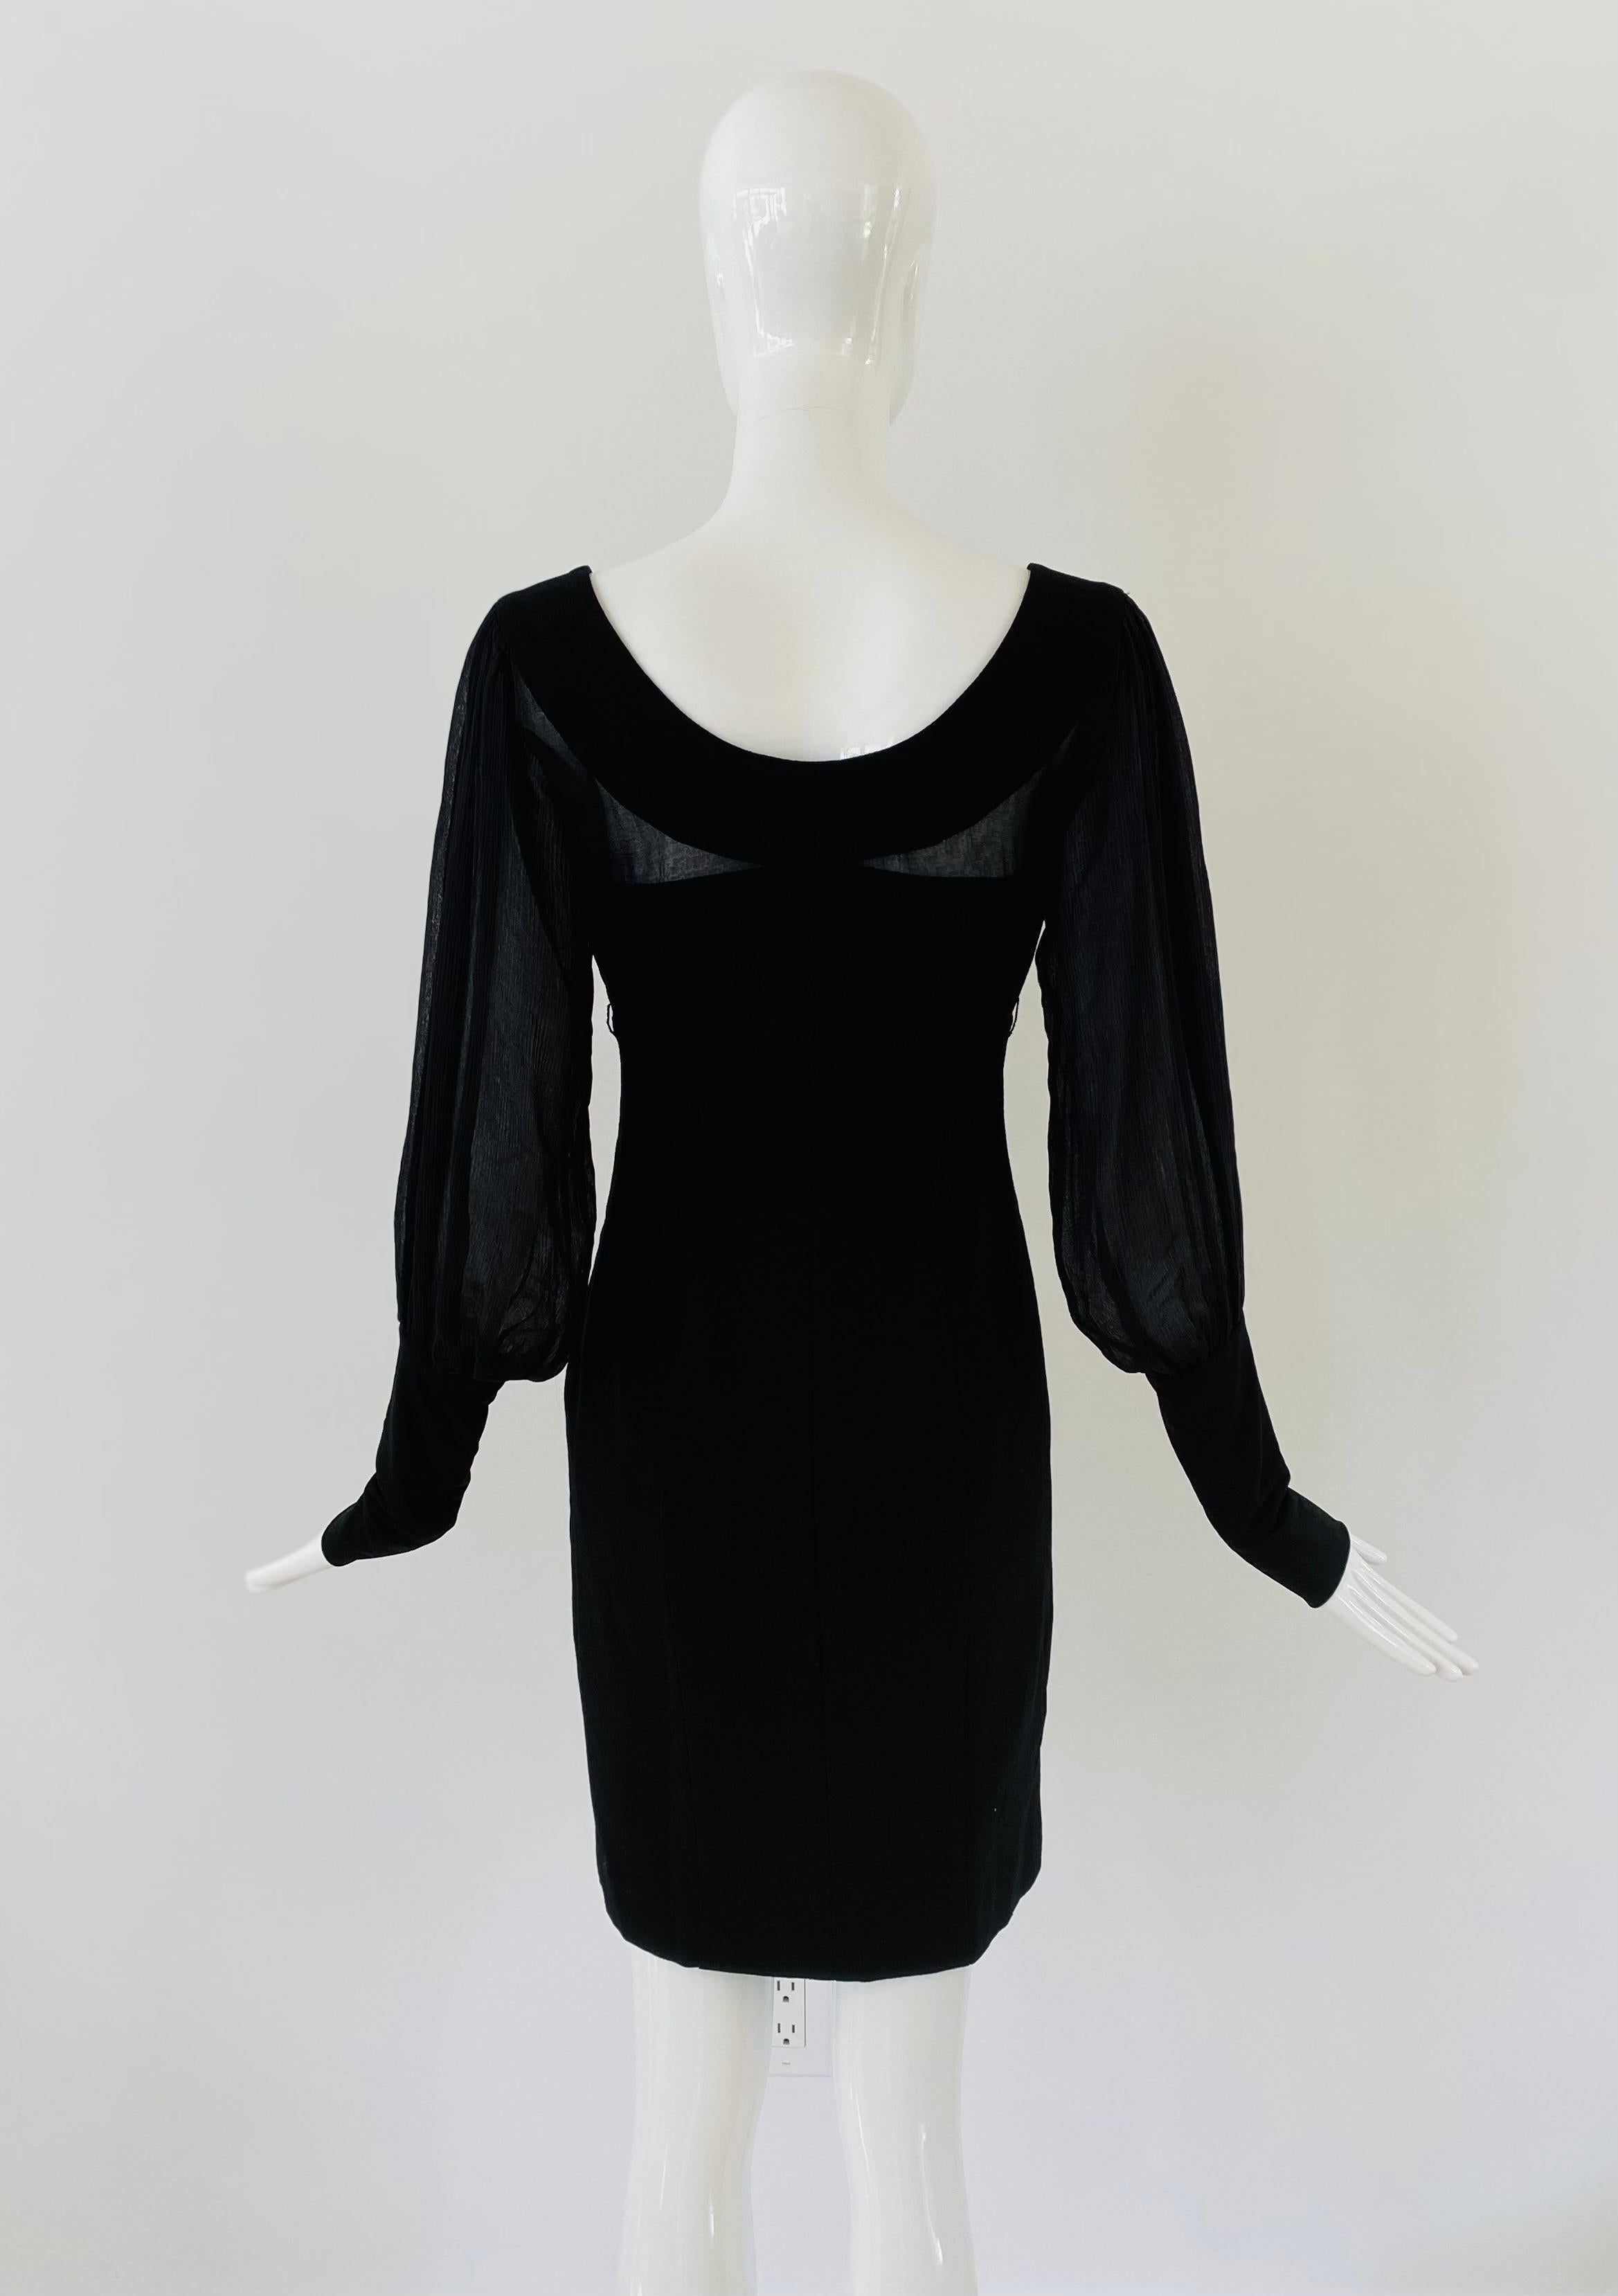 2000s Gianfranco Ferré Black Long Sleeve Dress  In Good Condition For Sale In Miami, FL